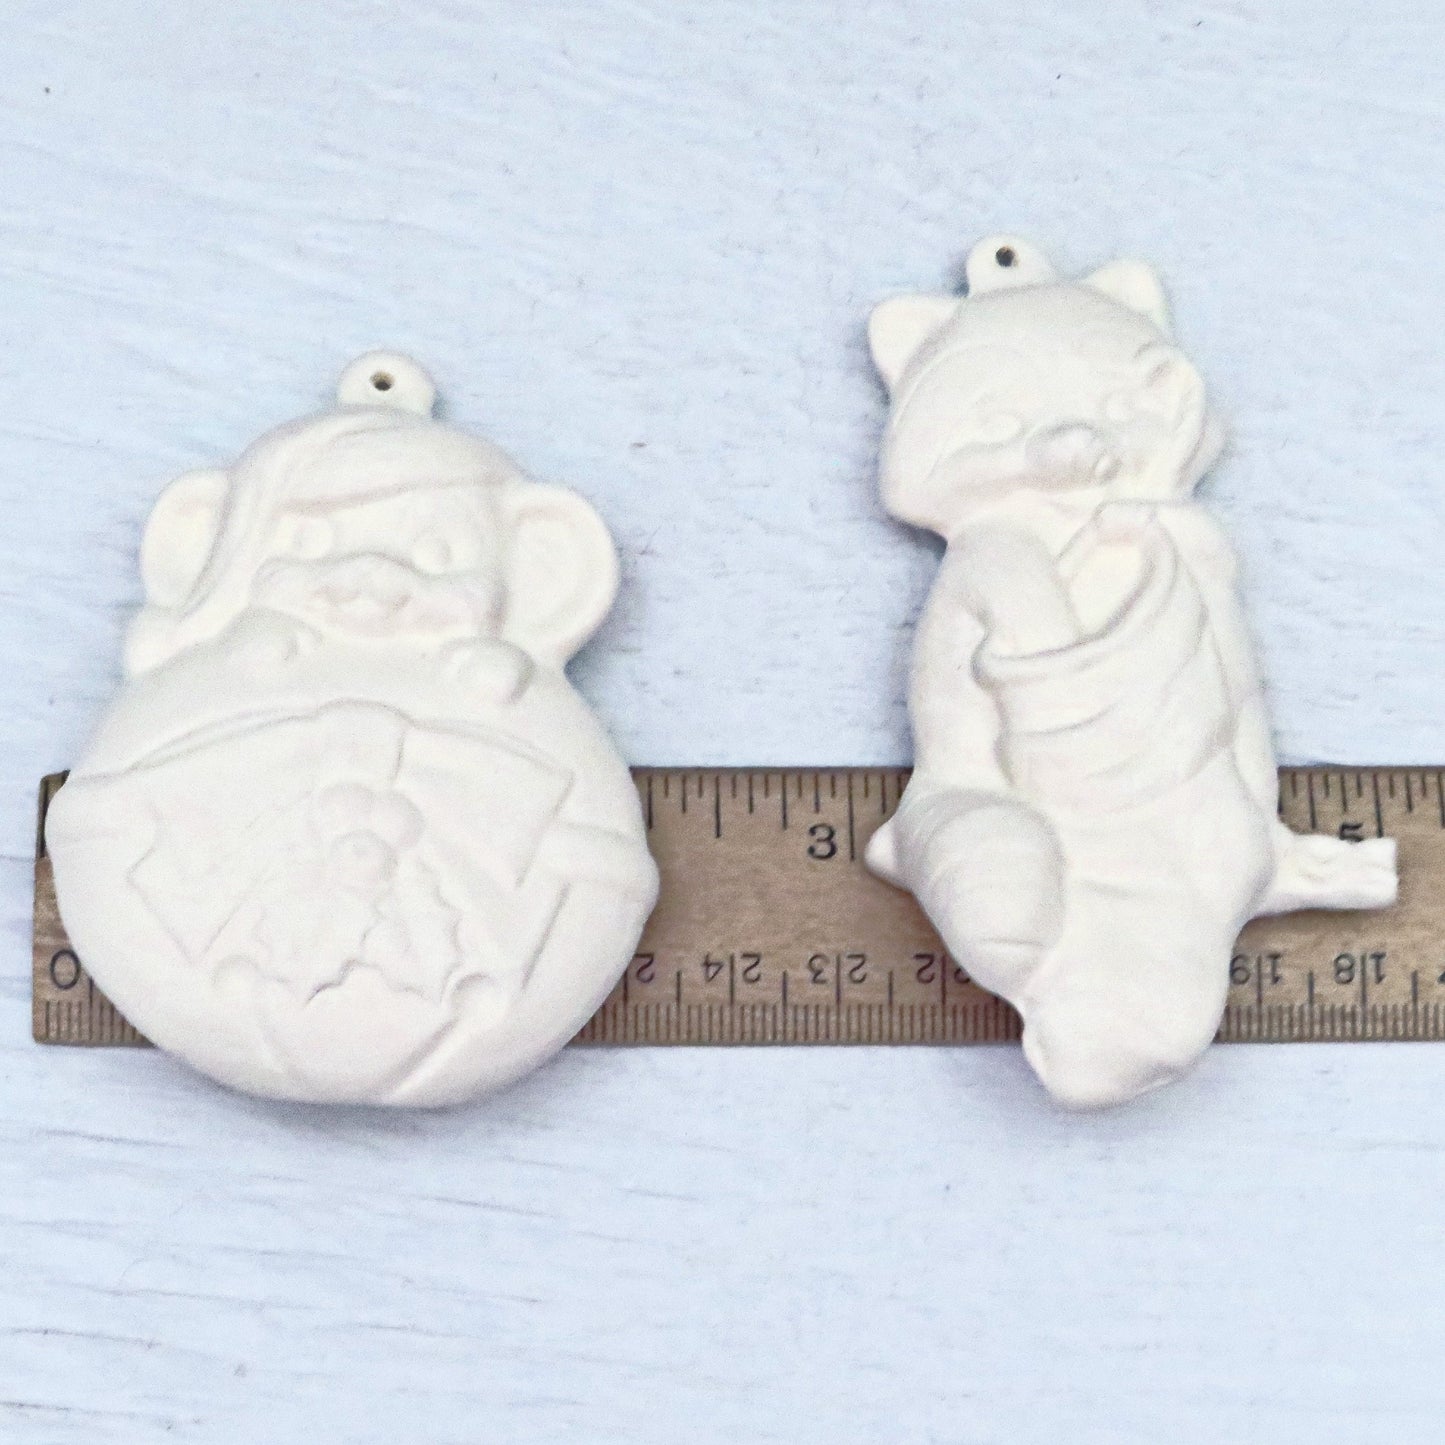 Ready to Paint Ceramic Cat and Mouse Christmas Tree Ornaments, Unpainted Christmas Decor